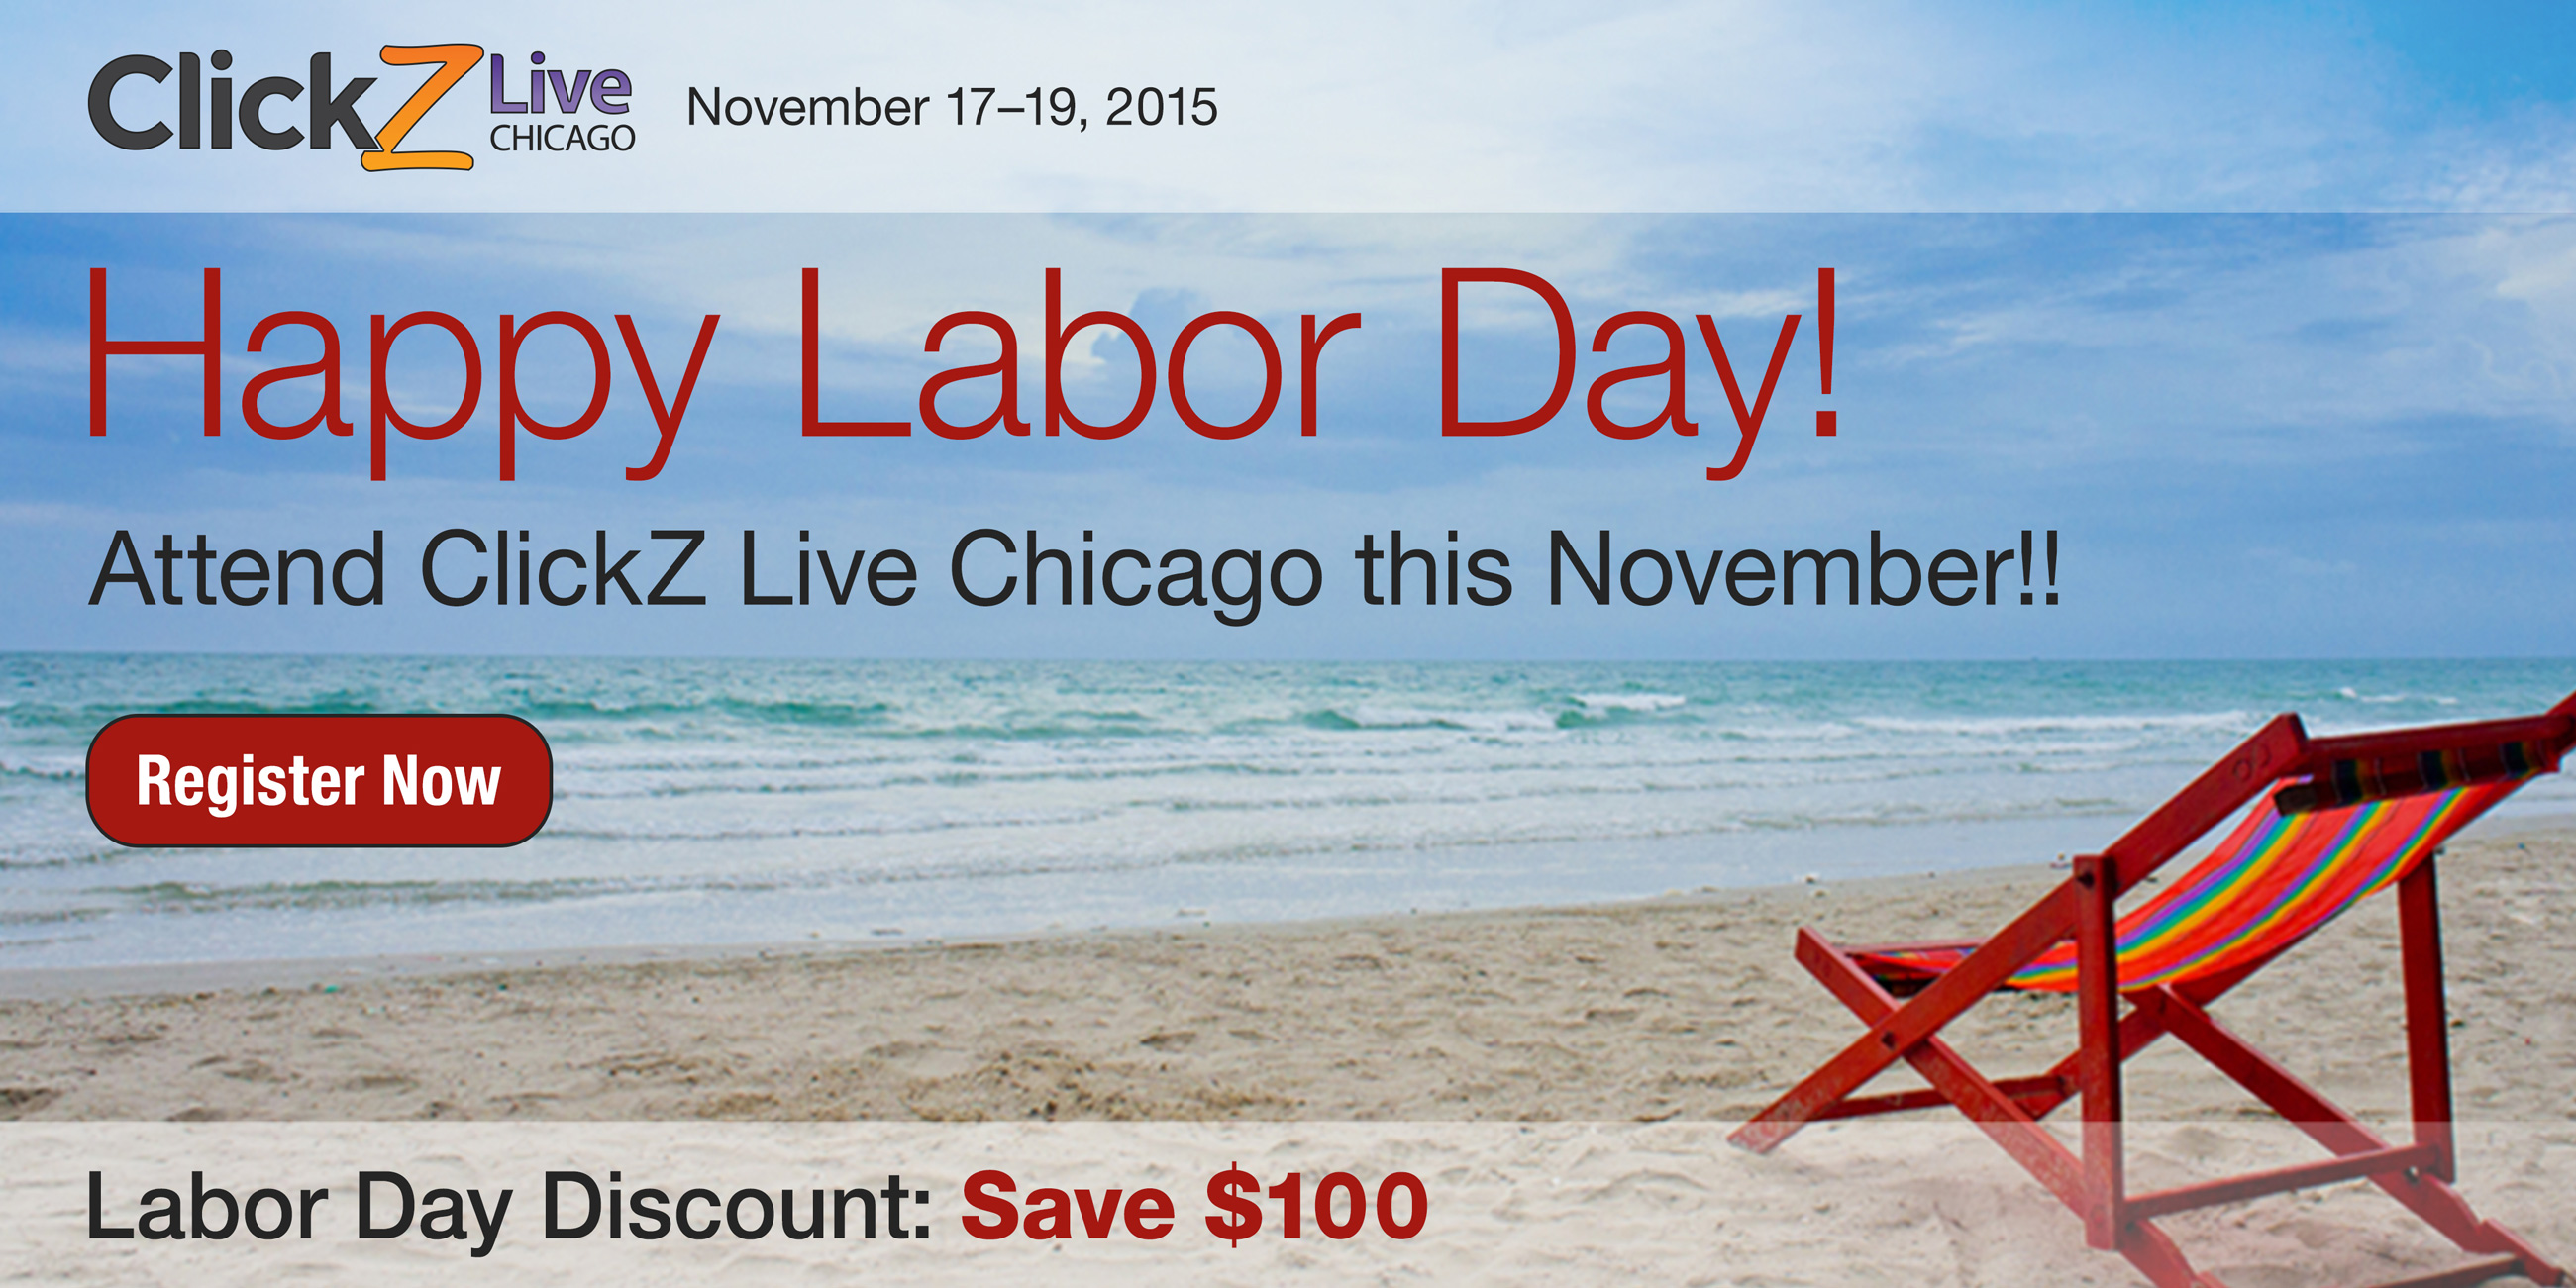 Display ad and social media image at 2:1 ratio for the ClickZ Conference in  Chicago, promoting a discount for Labor Day. The photo is of a red beach chair which is on the sand and facing the ocean and the horizon. The text is in red and dark grey.